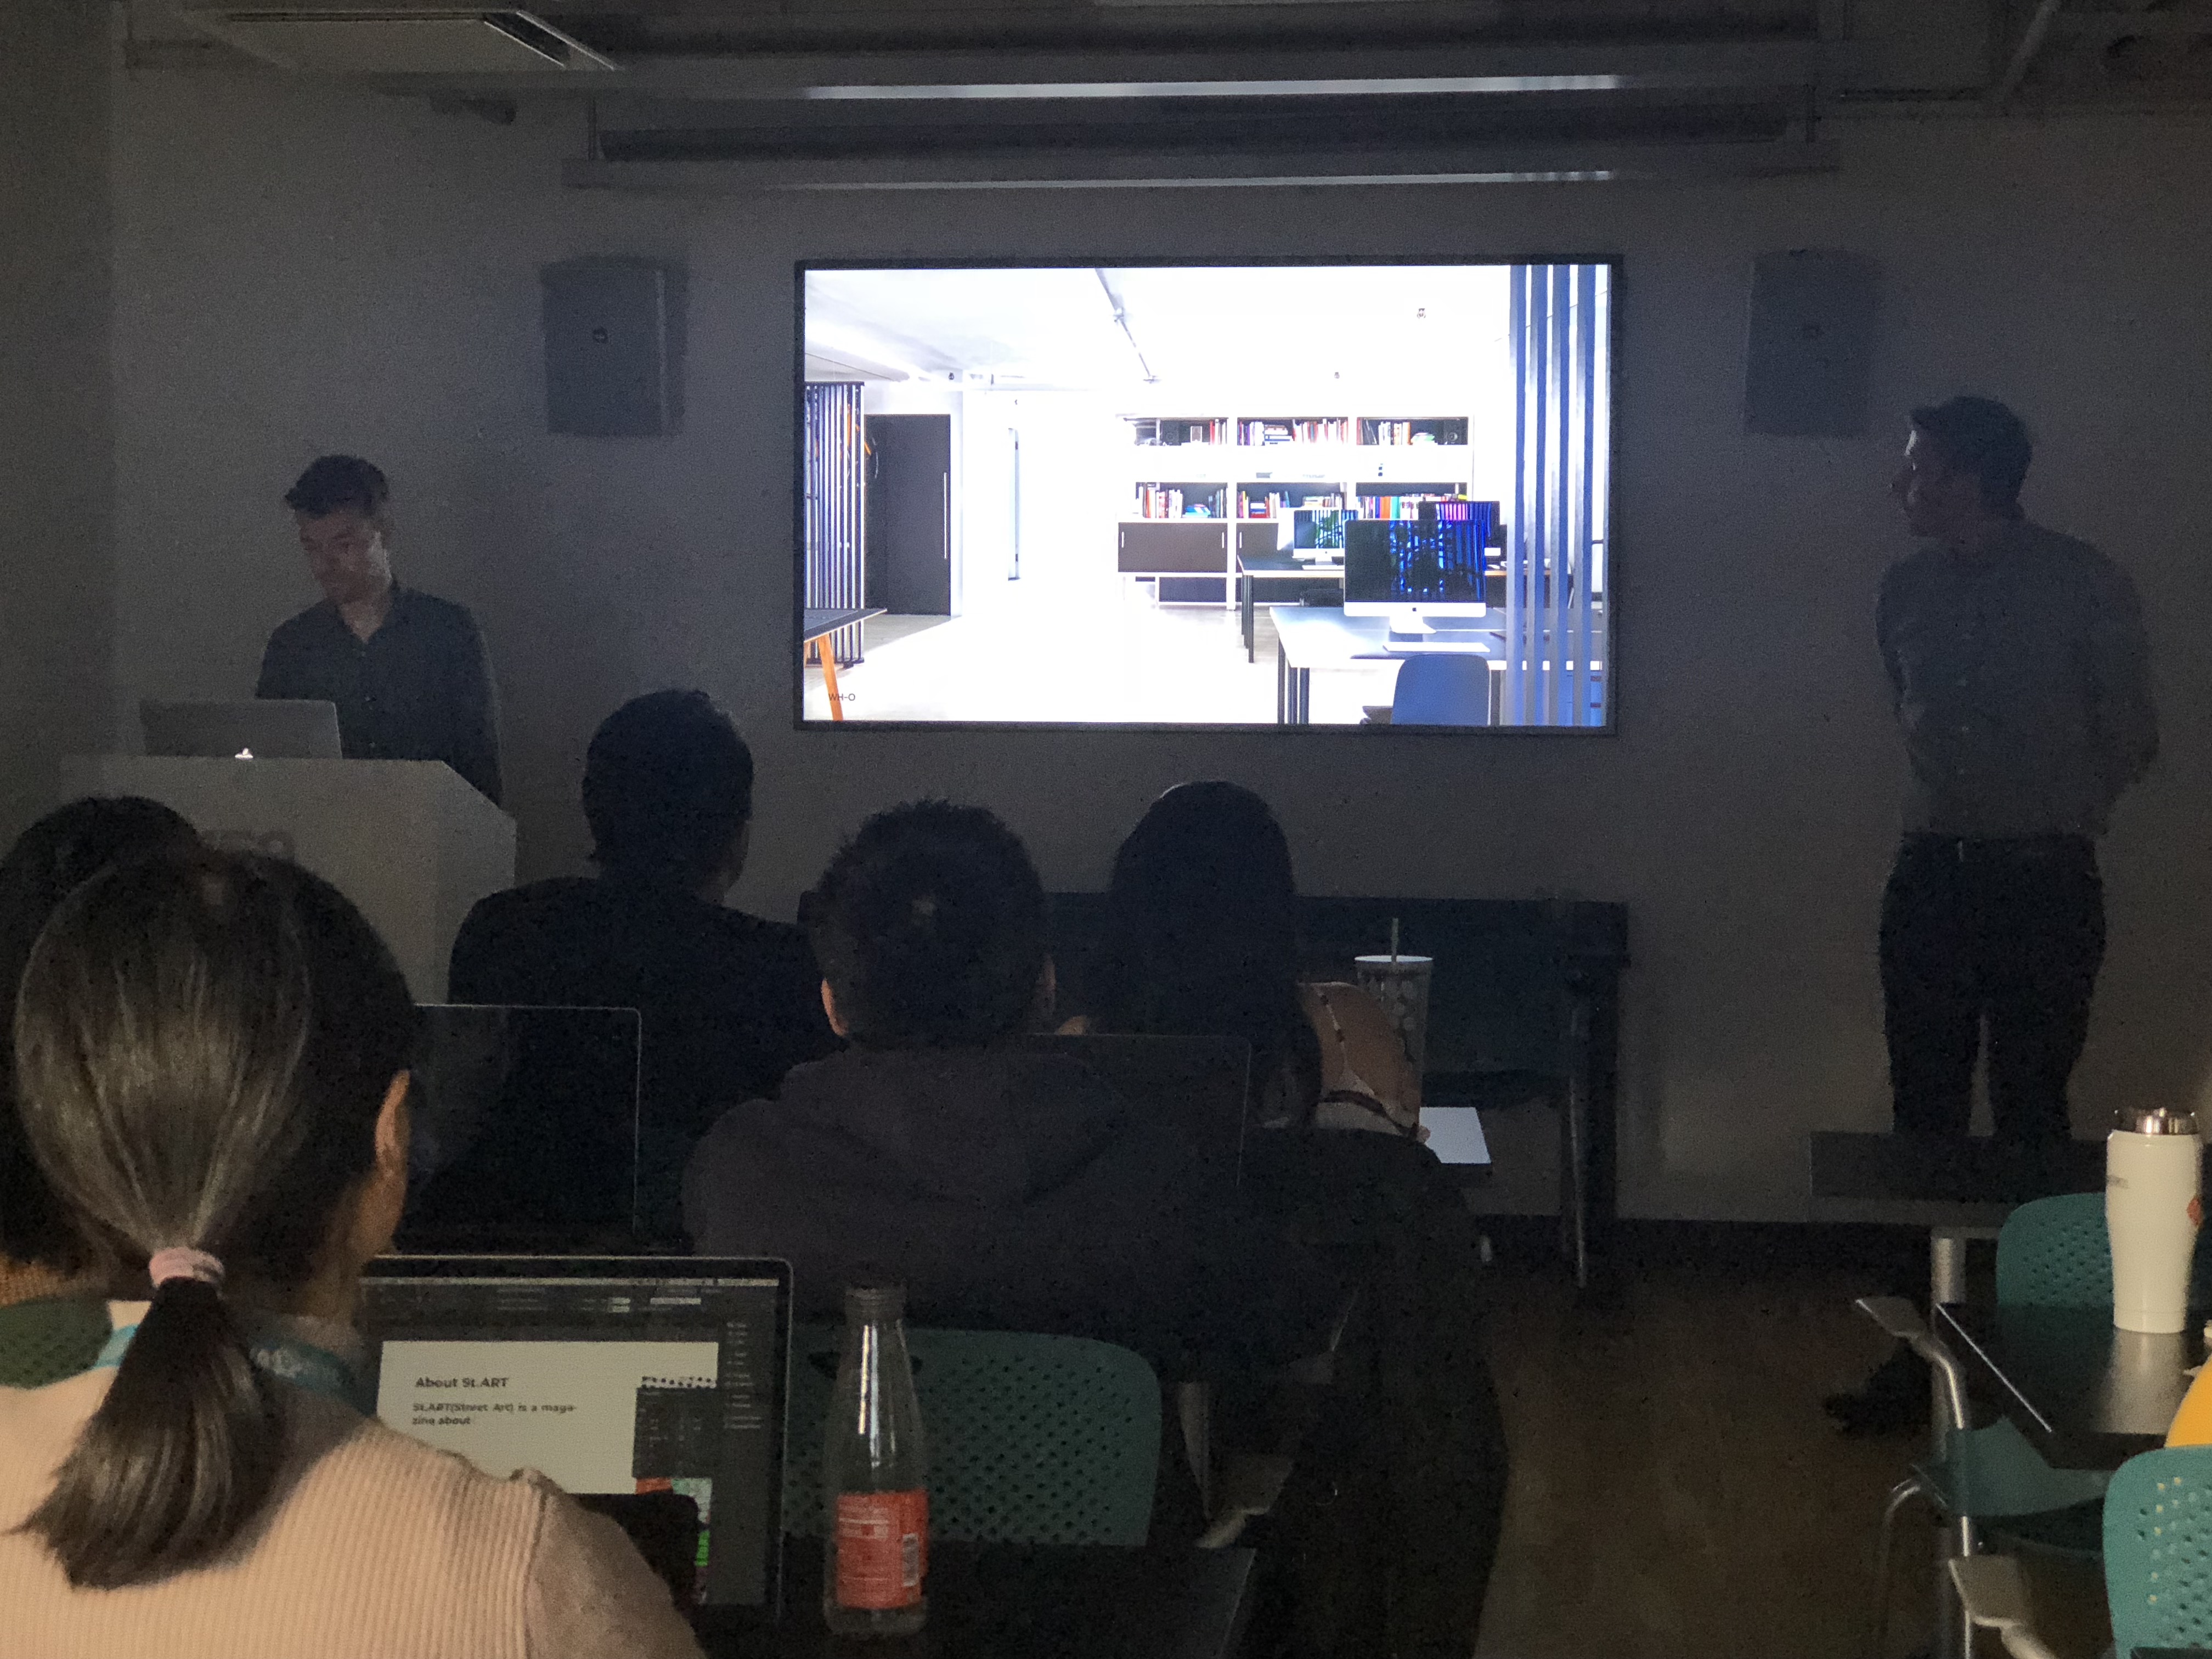 A photo of some students in a classroom listening to a lecture, while a teacher shows them an office room on a tv screen.